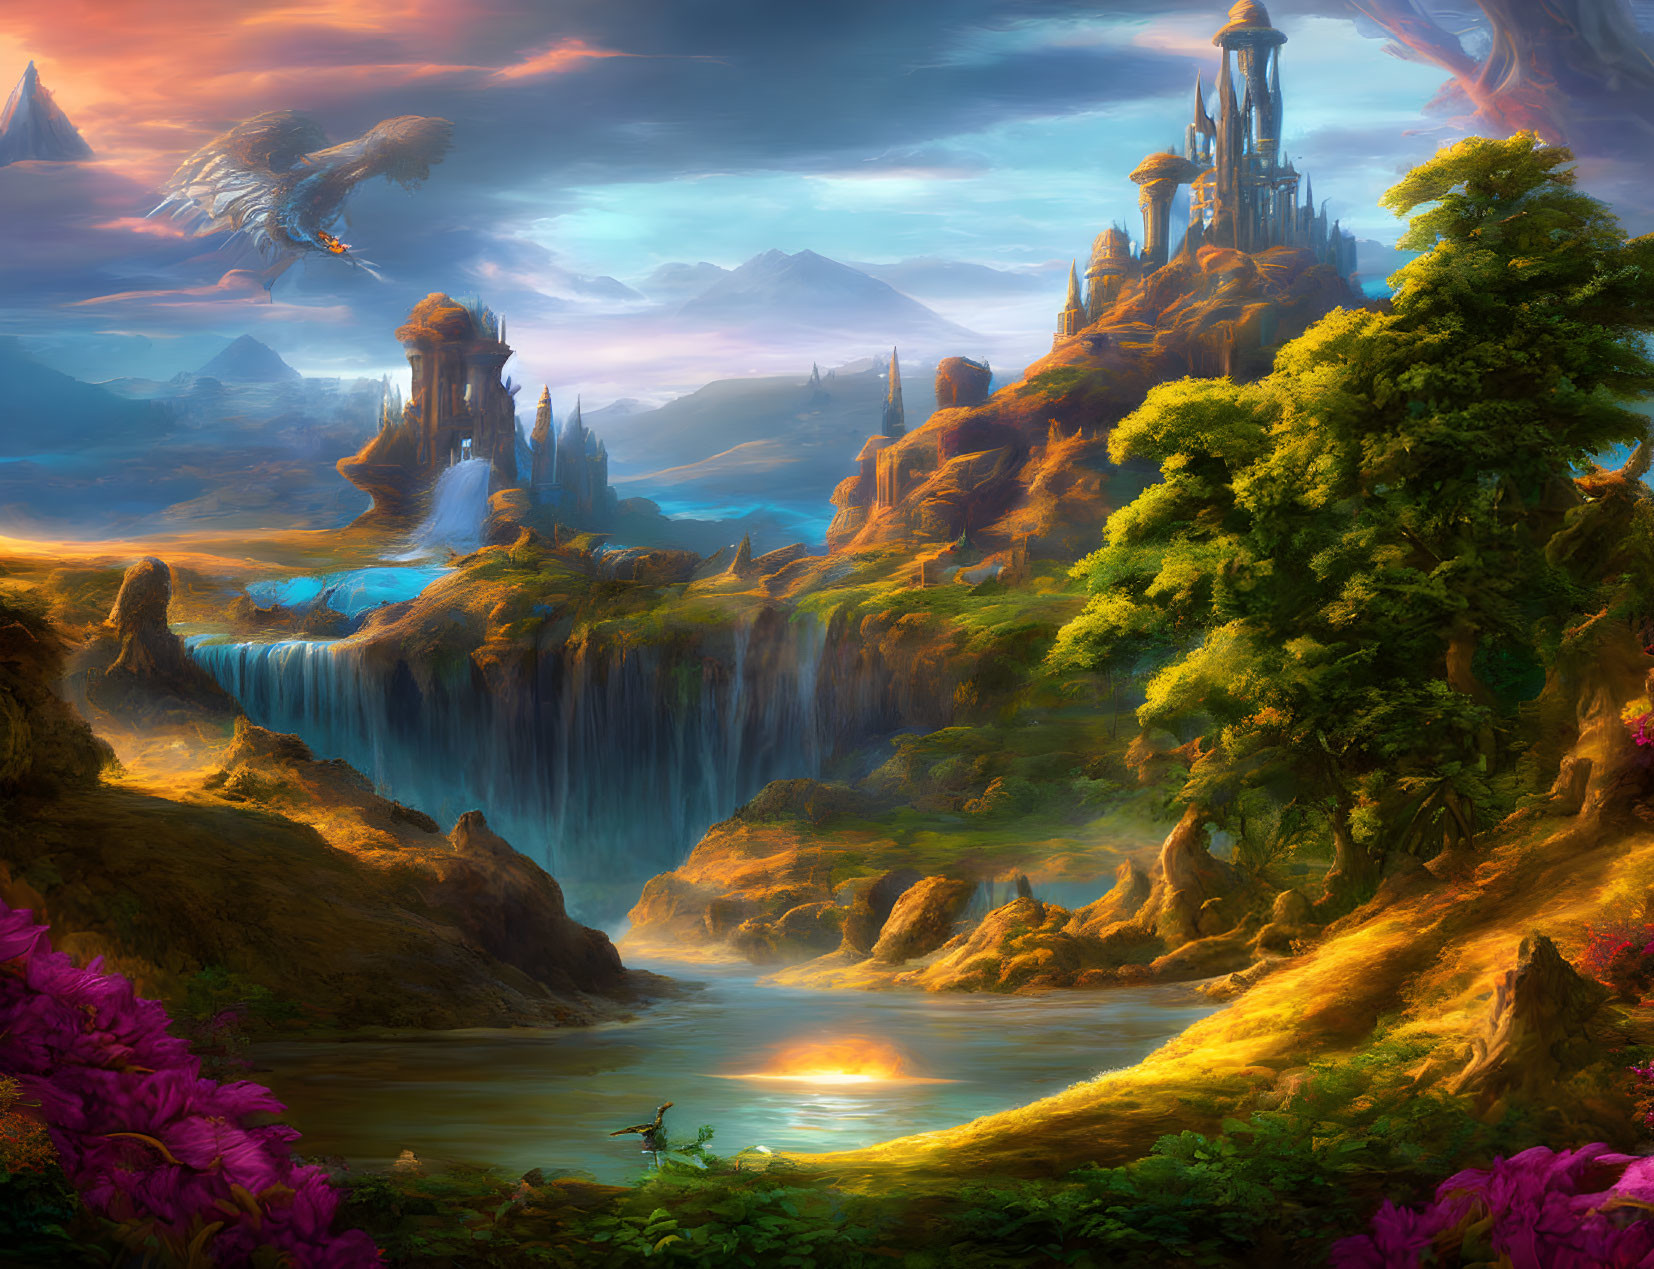 Fantasy landscape with castle, waterfalls, river, flora, and dragons